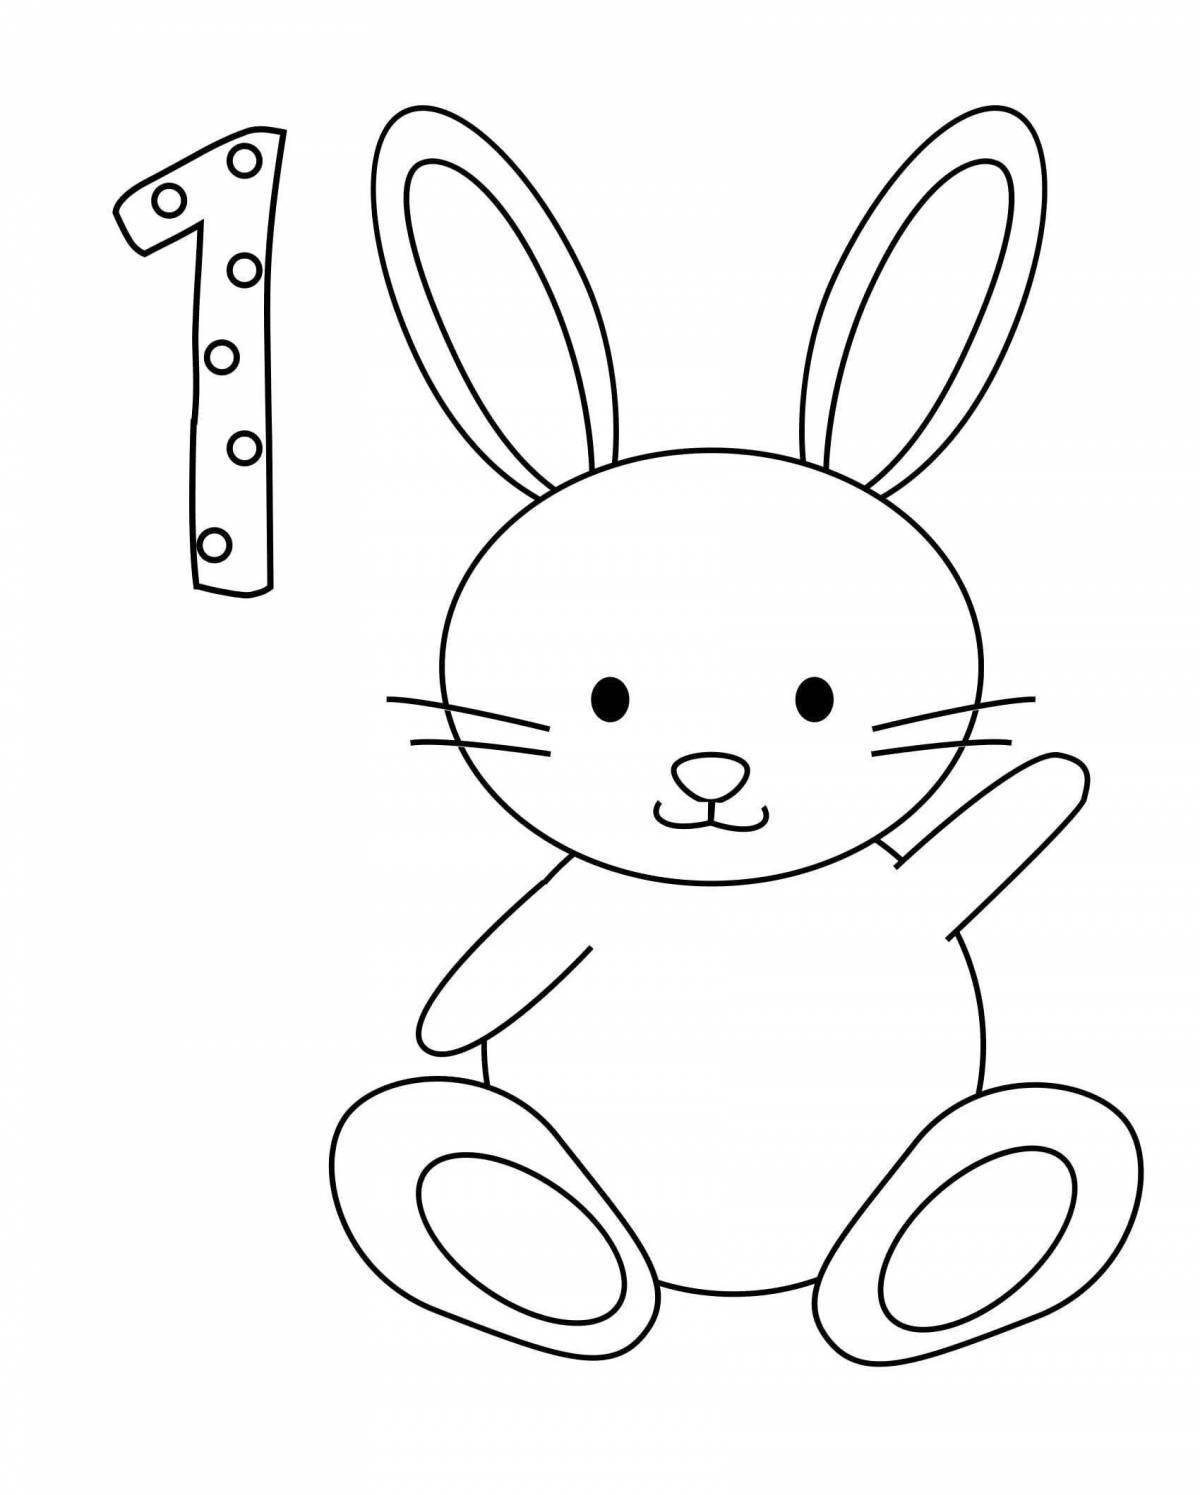 Adorable bunny coloring book for kids